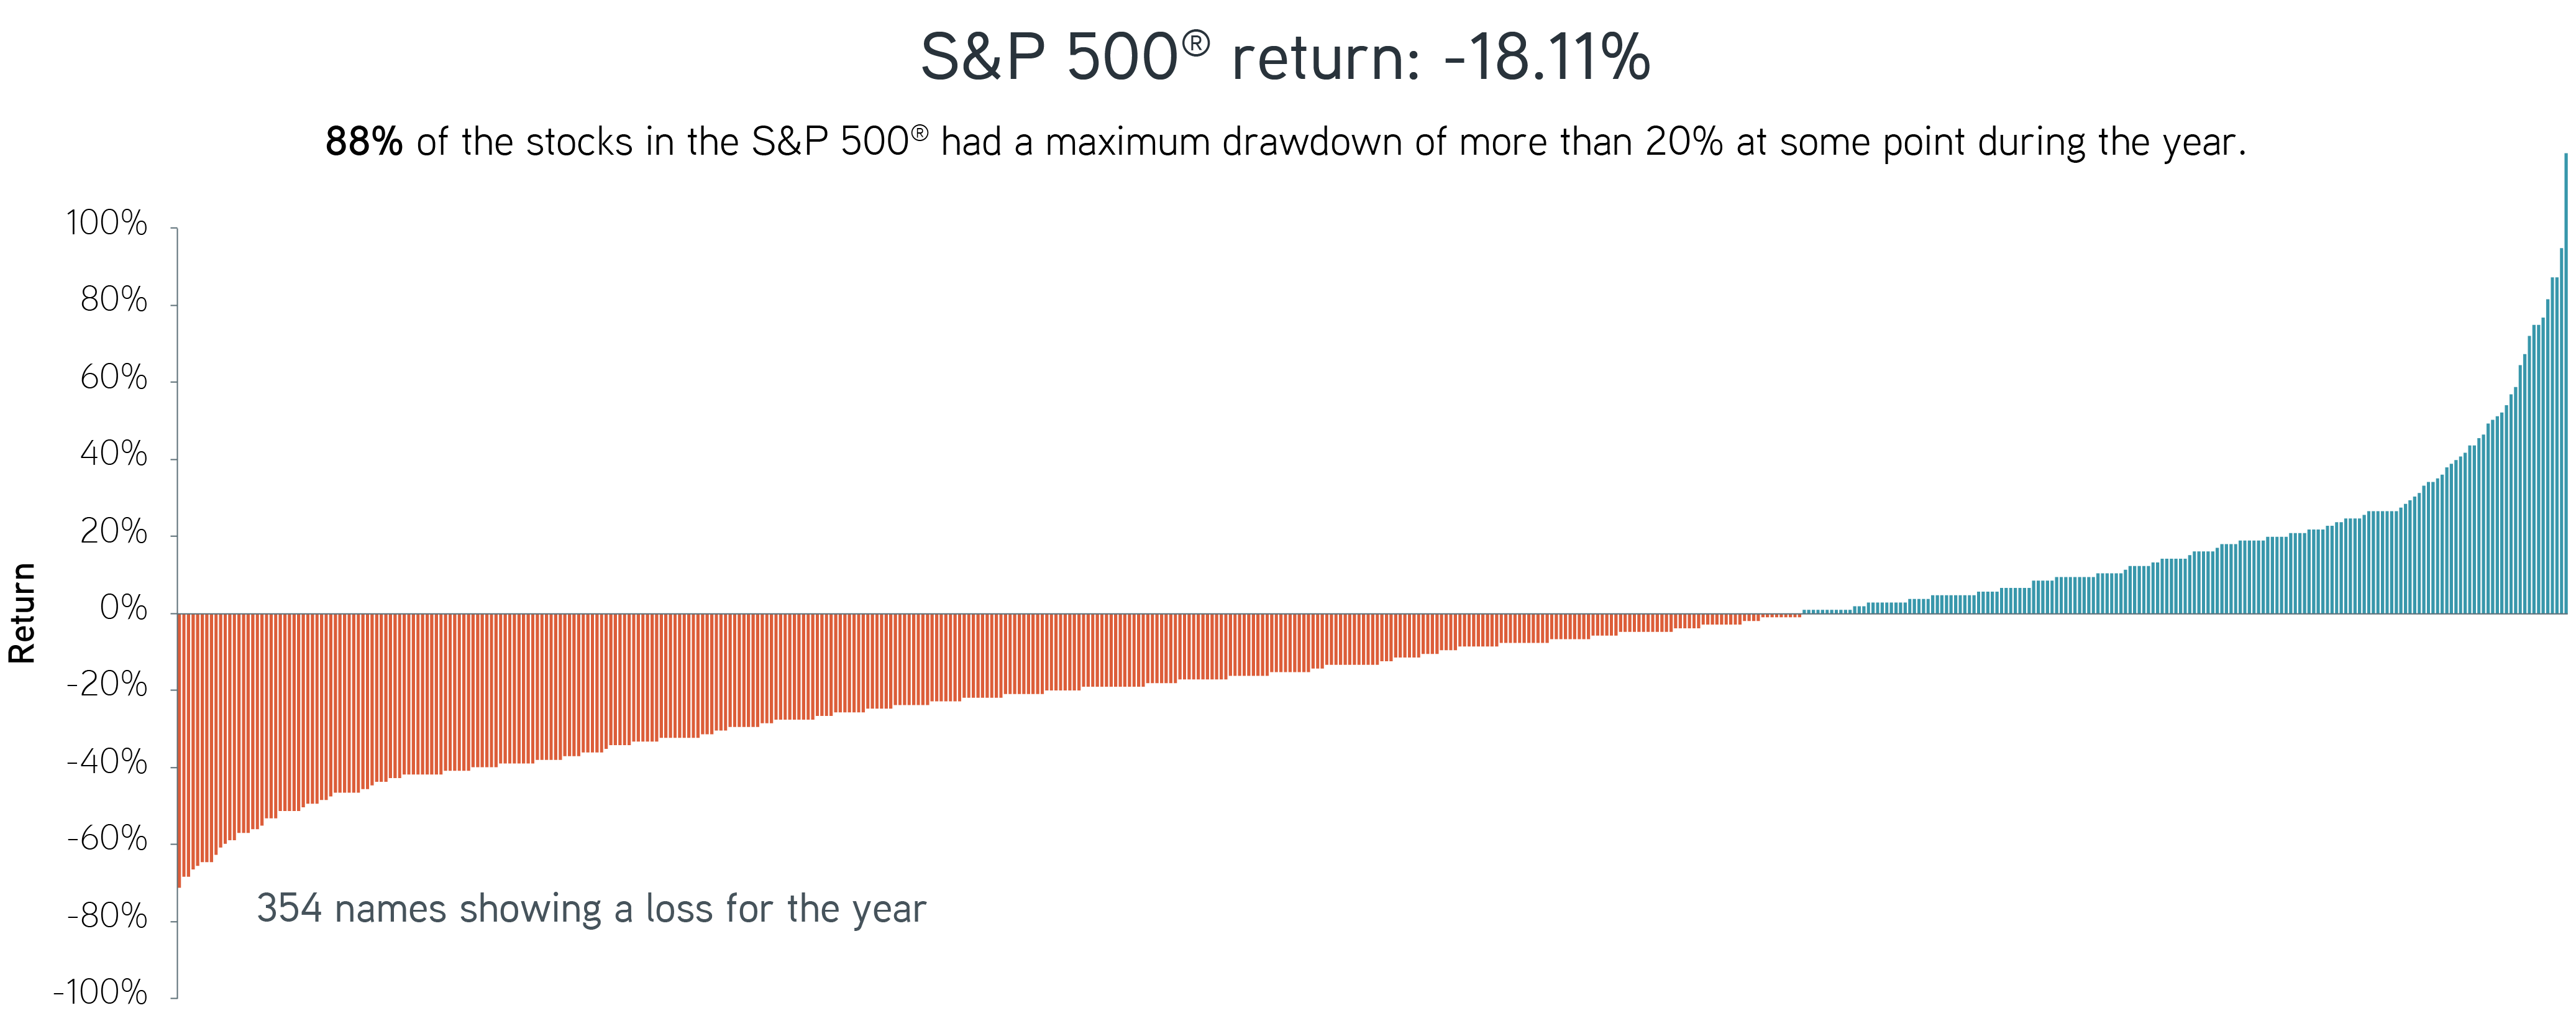 80% of the stocks in the S&P 500 had a maximum drawdown of more than 15% at some point during the year.